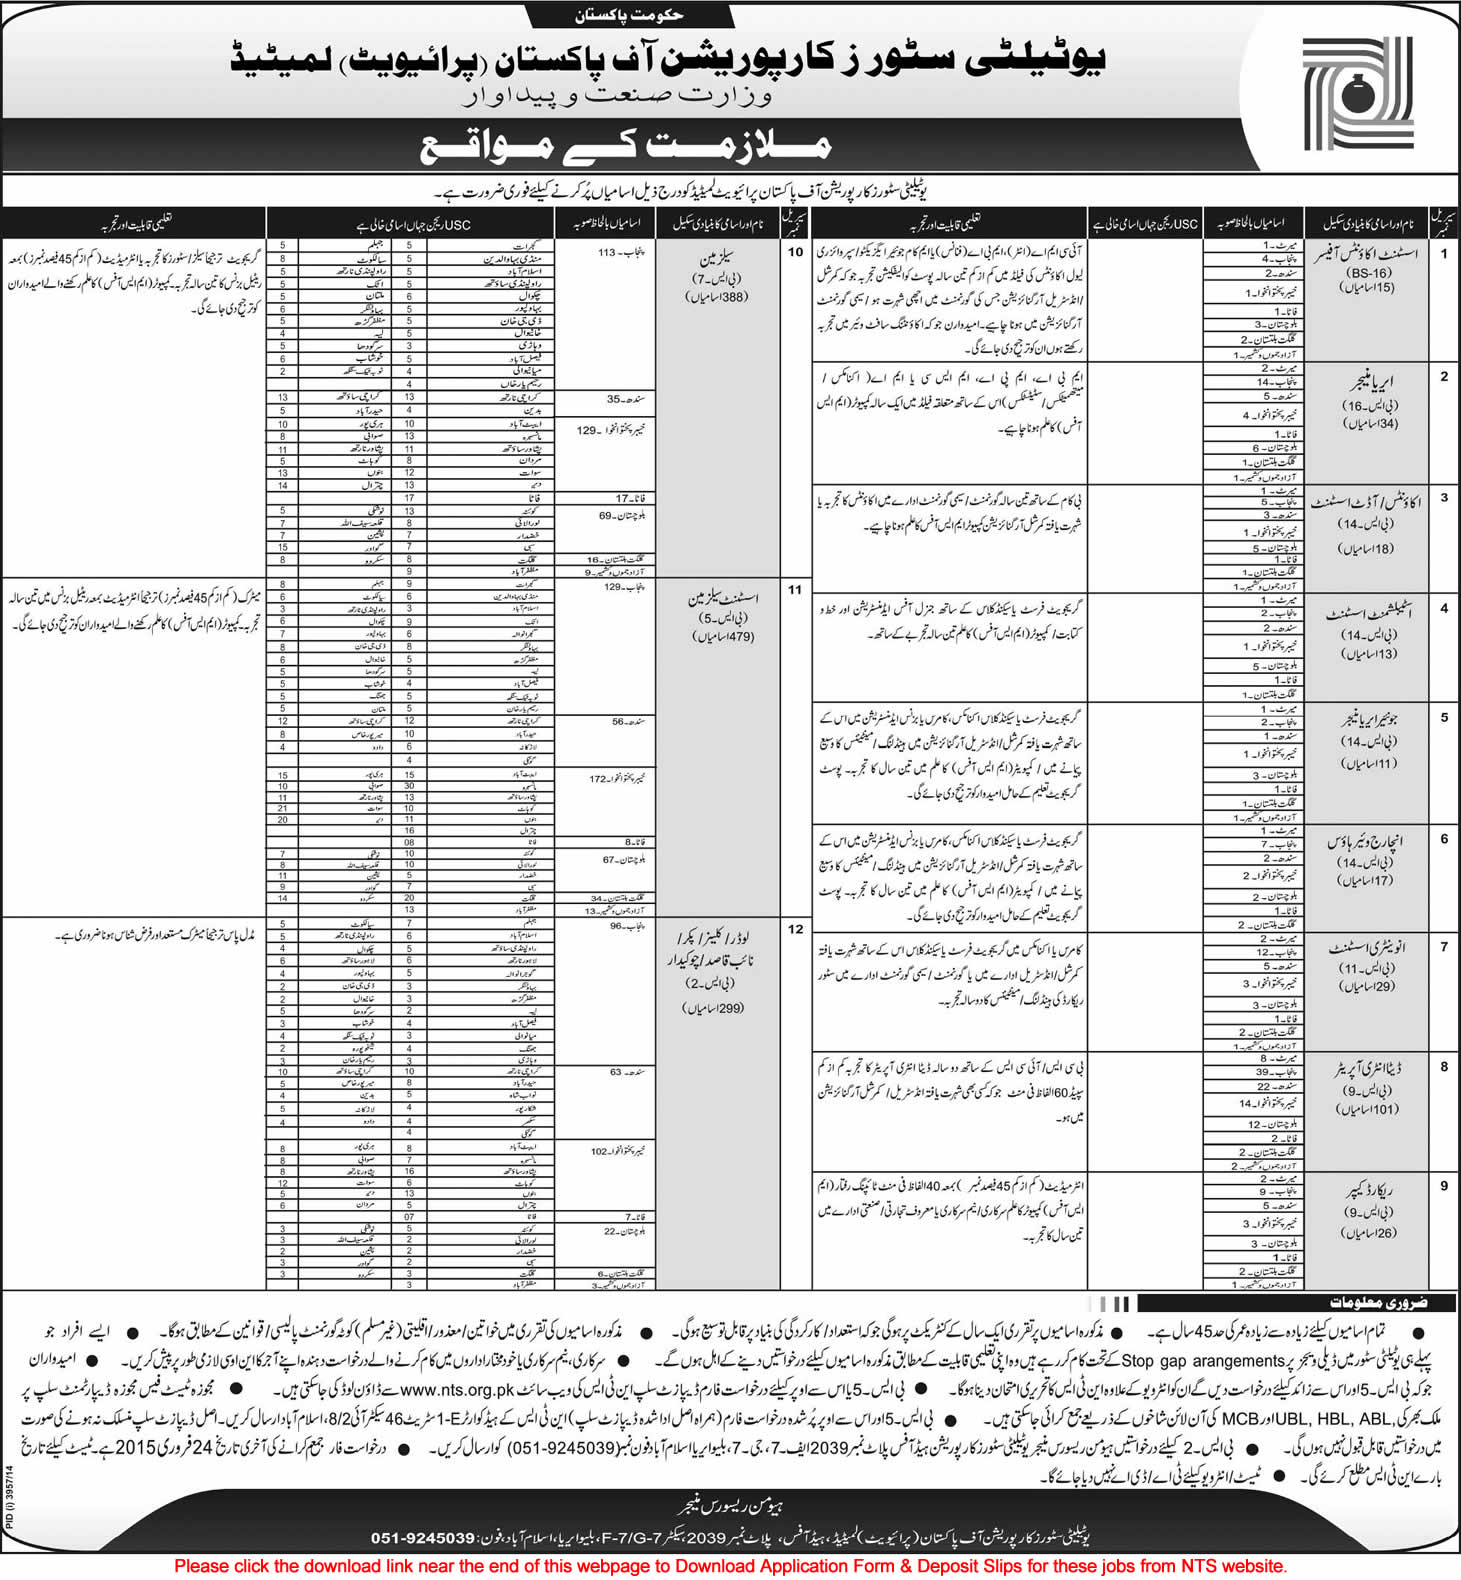 Utility Stores Corporation of Pakistan Jobs 2015 February NTS Application Form Download Latest